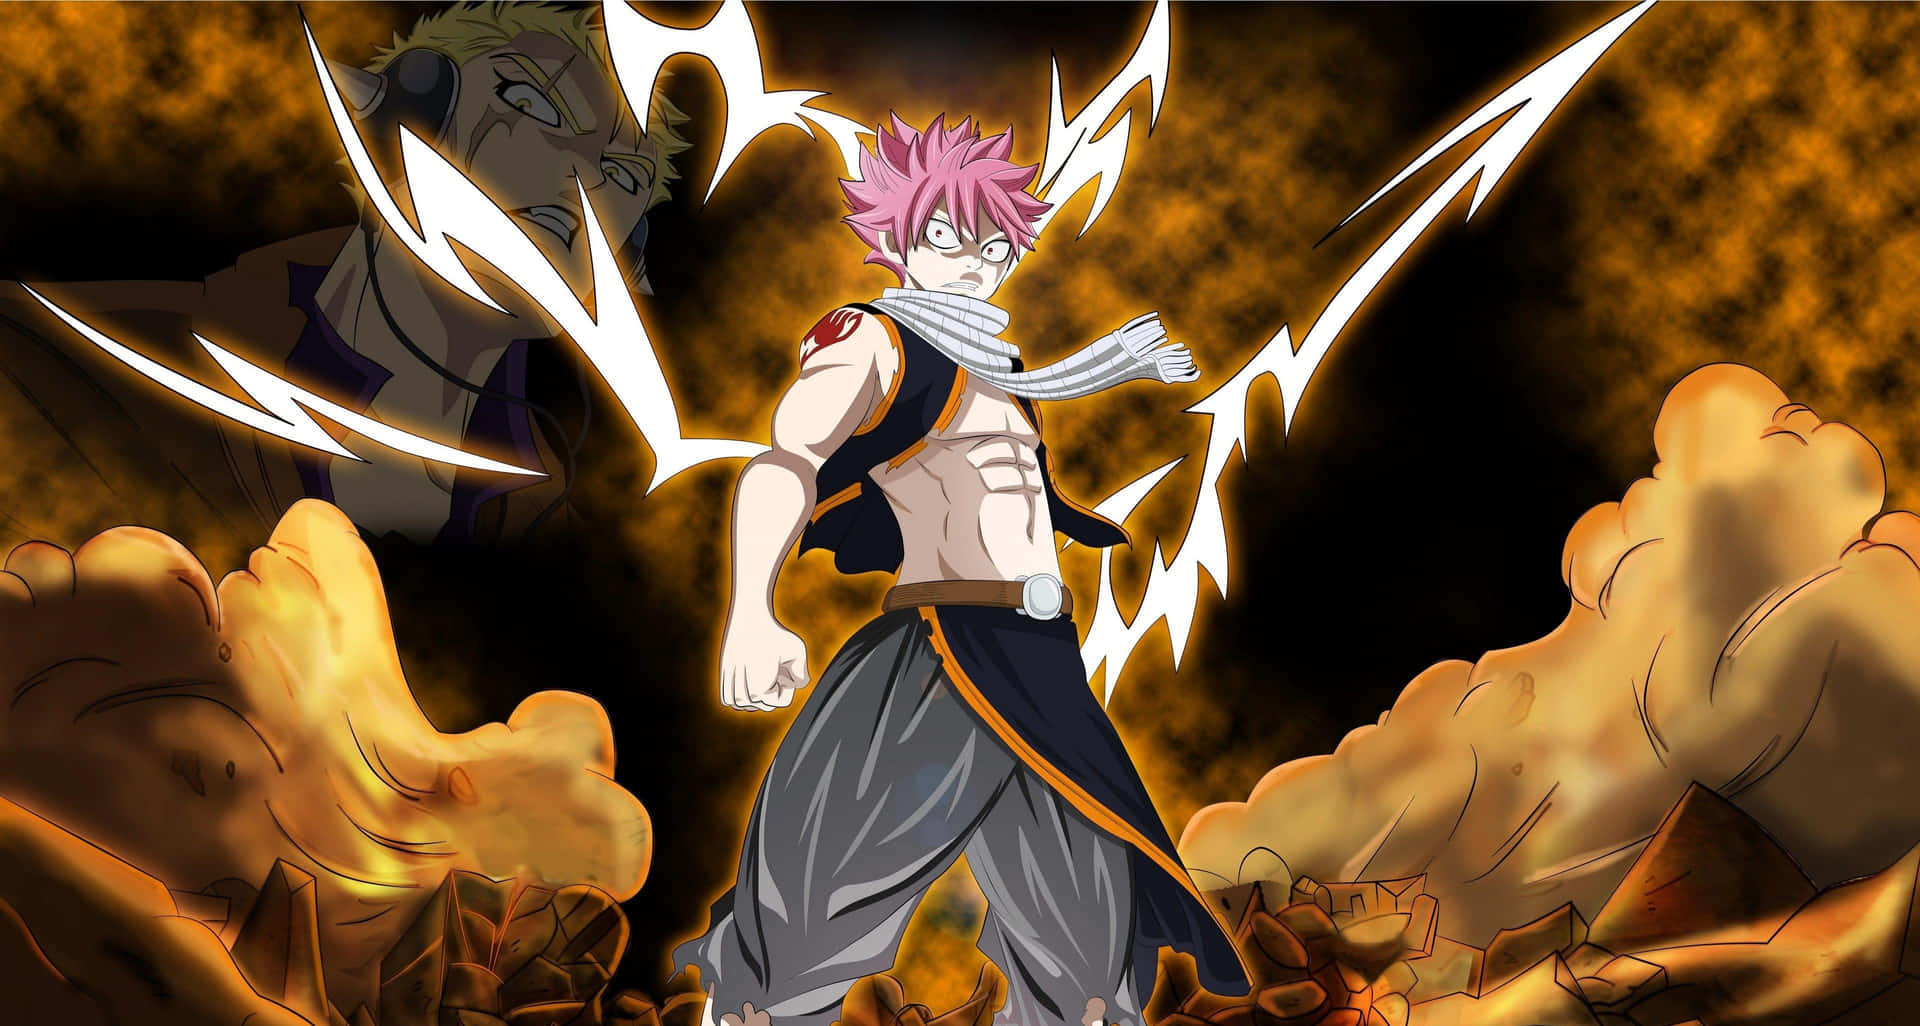 Natsu Dragneel Posing With Clenched Fists In Front Of A Fiery Background Background